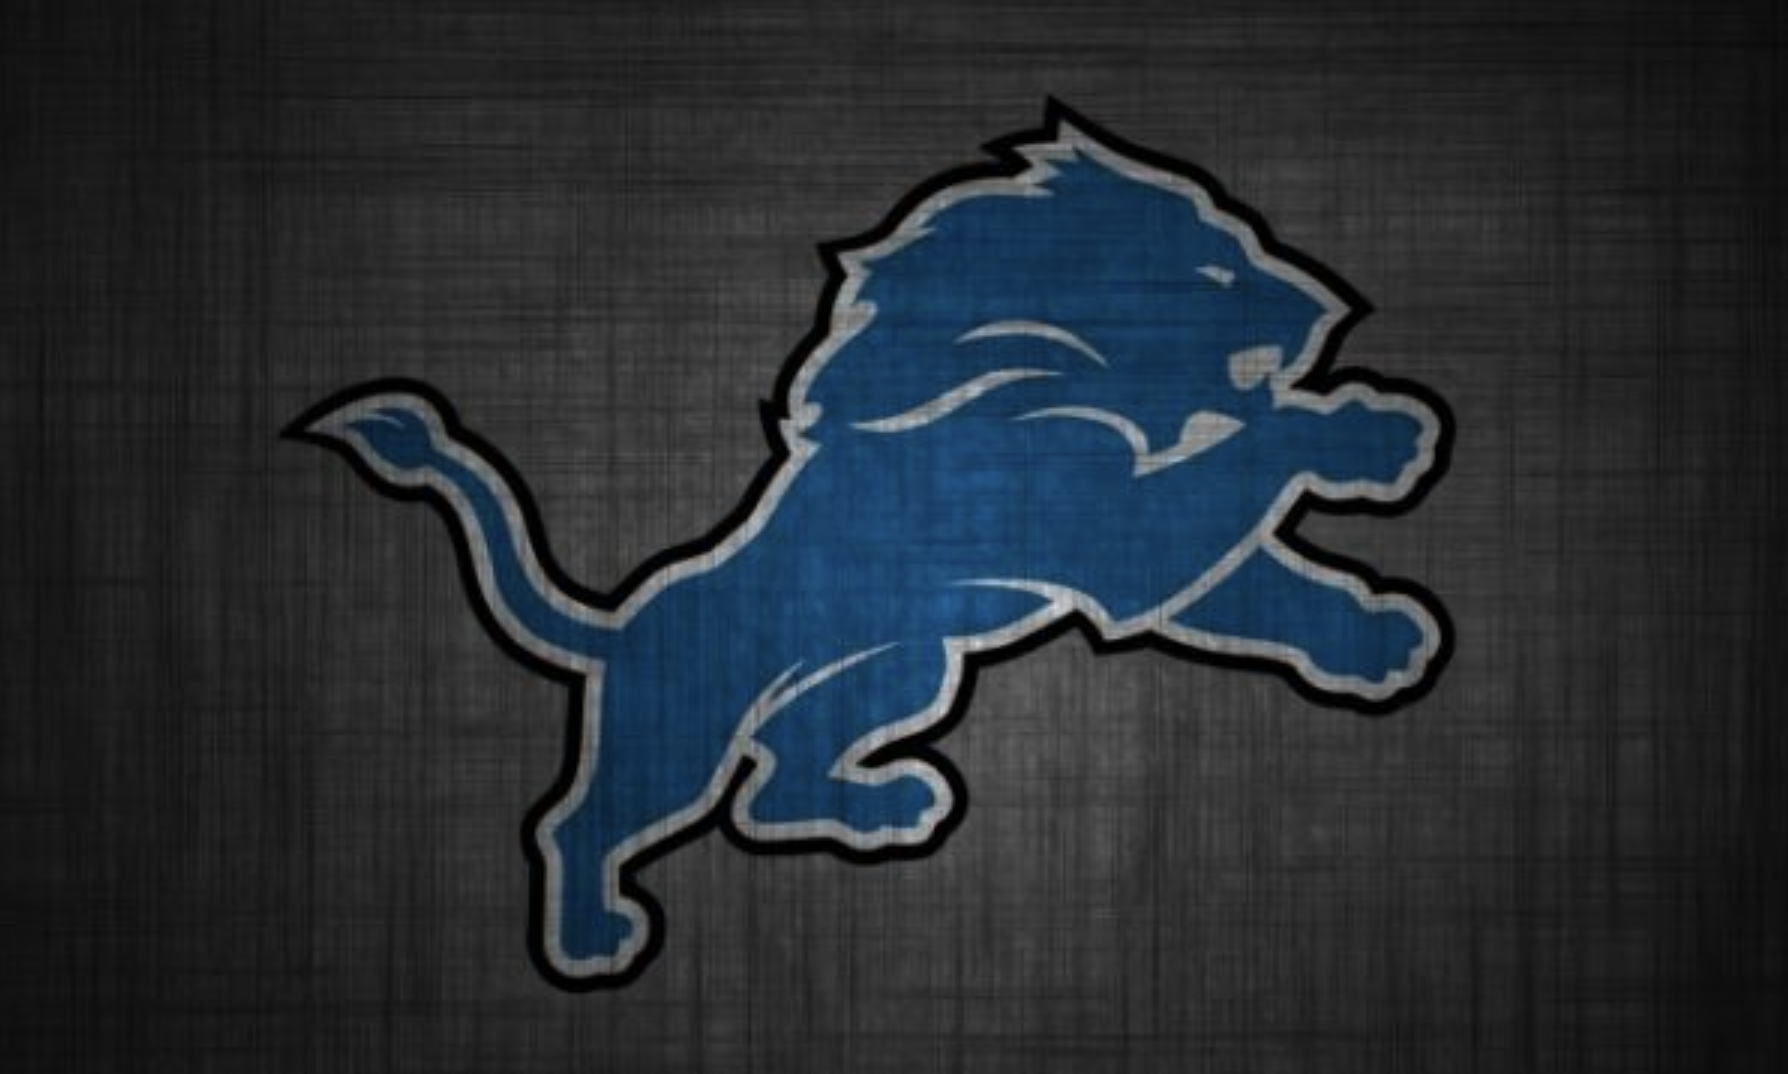 Why Zach Frazier Is Perfect Fit for Detroit Lions Detroit Lions select Detroit Lions sign Isaiah Williams Detroit Lions sign 2 safeties